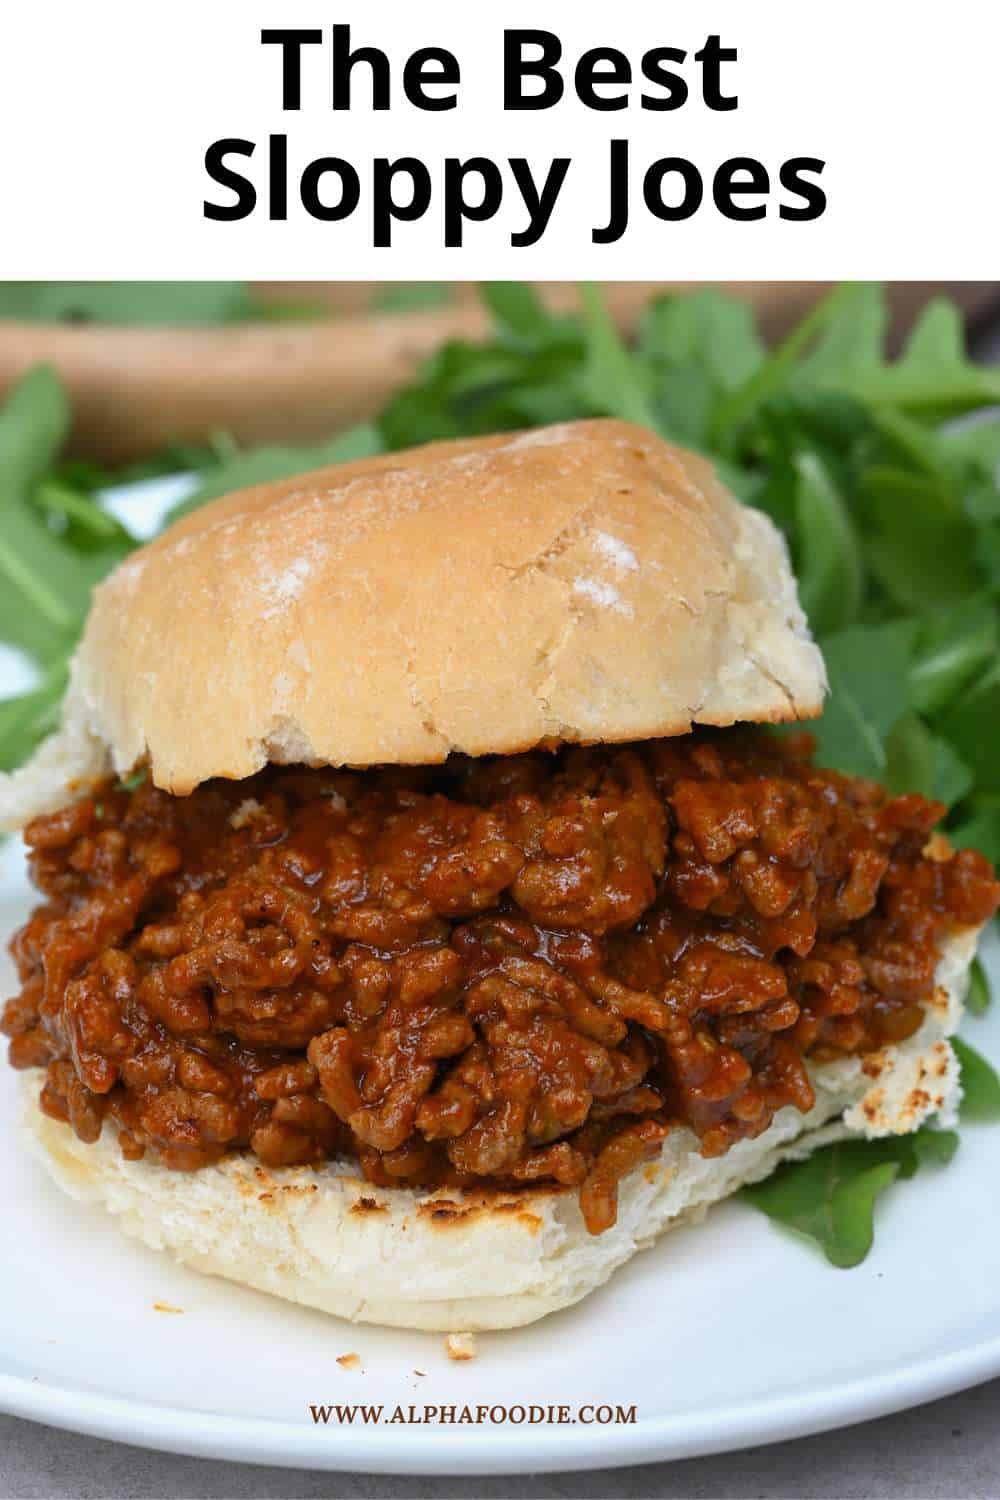 The Best Homemade Sloppy Joes - Alphafoodie